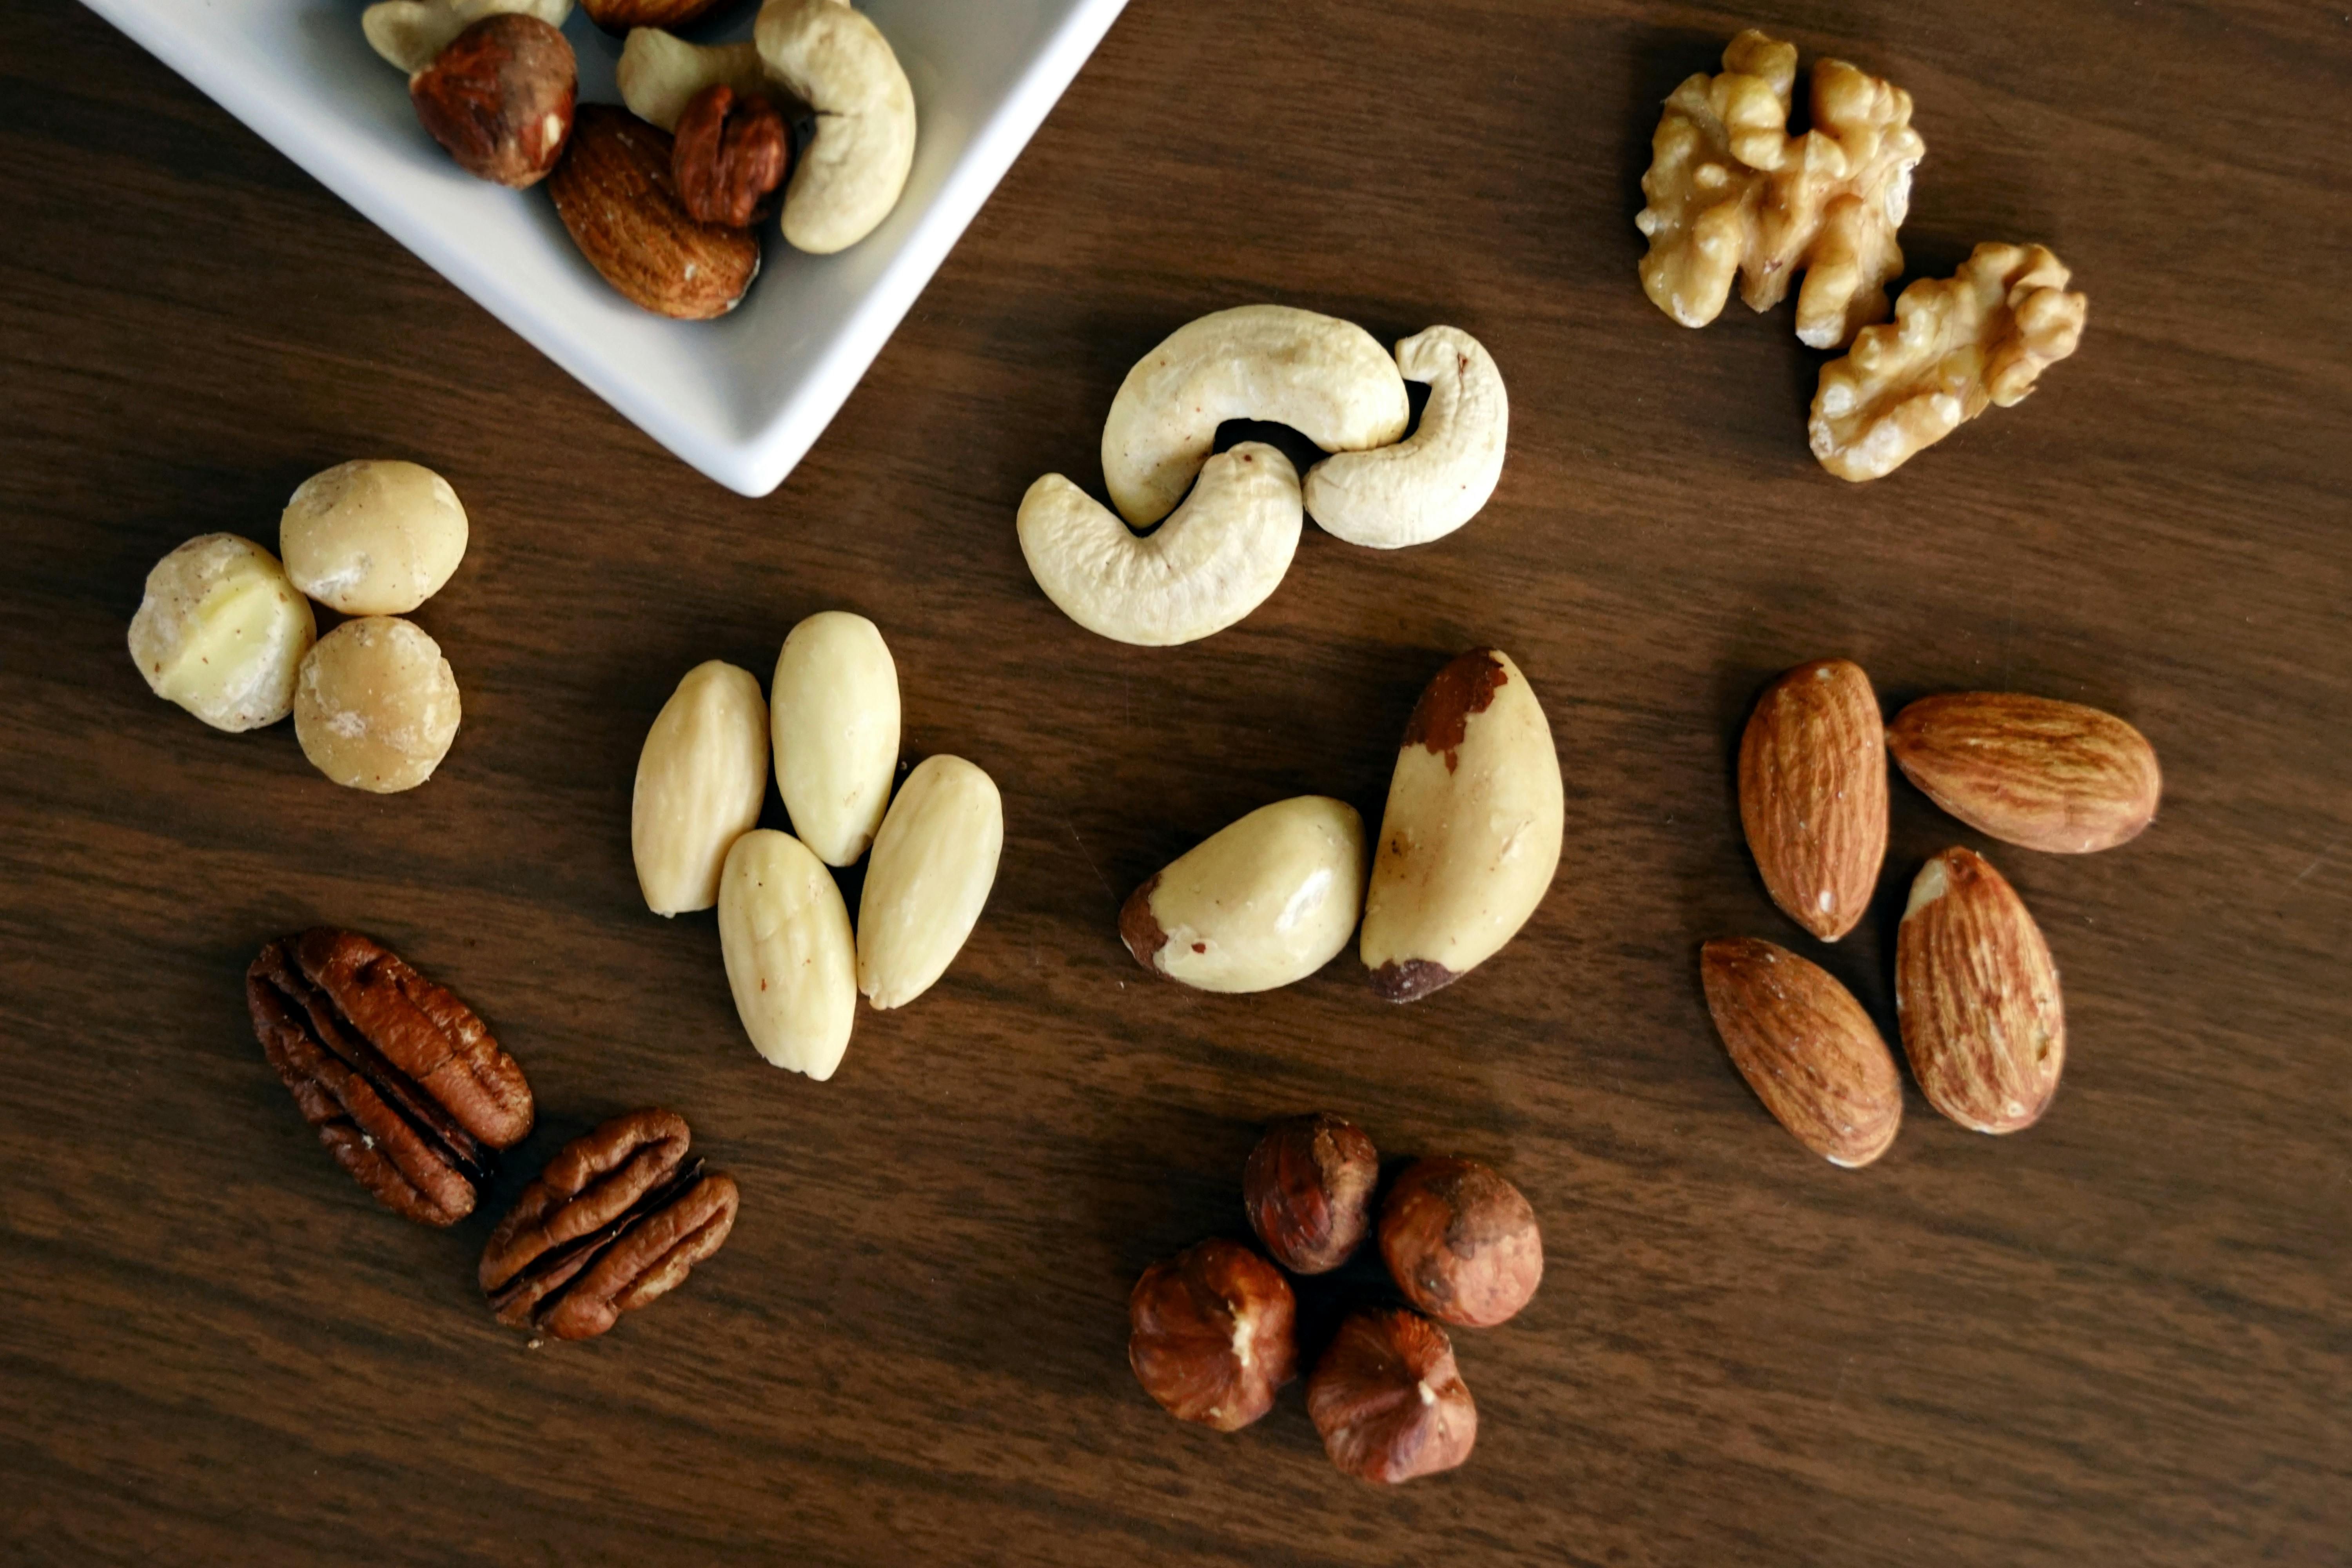 Assortment of nuts including almonds, suitable for intermittent fasting